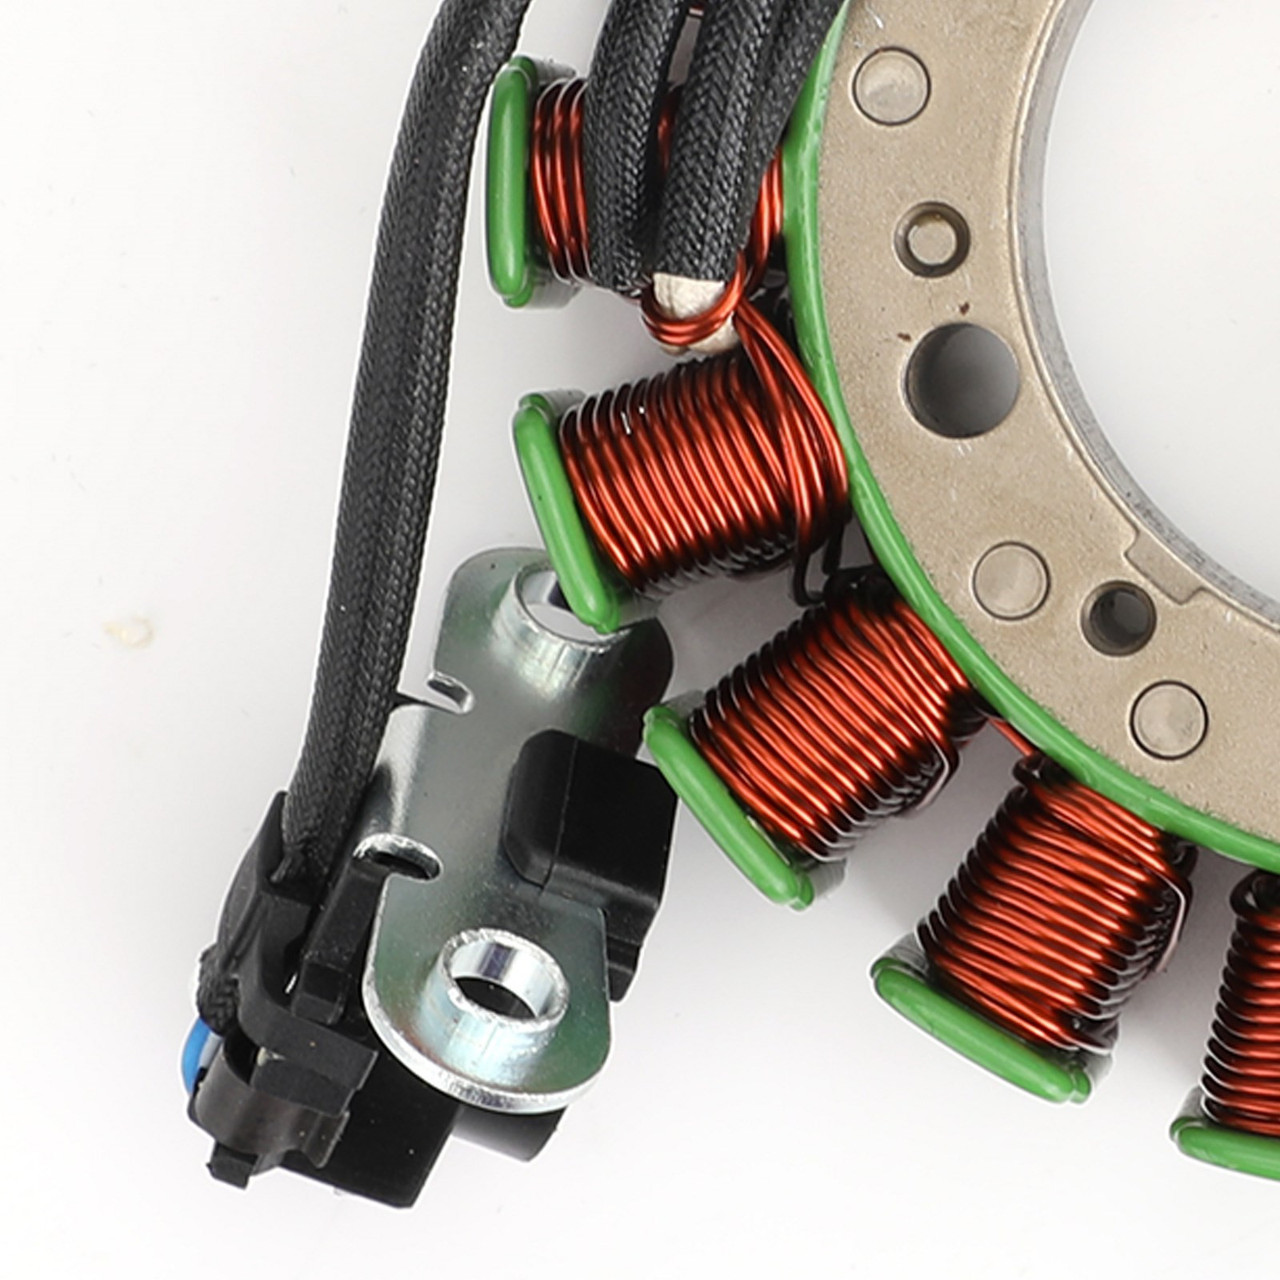 Alternator Stator For For Can-Am Traxter 500 99-05 Traxter Max 500 03-05 Traxter 650 05 Traxter Max 650 05